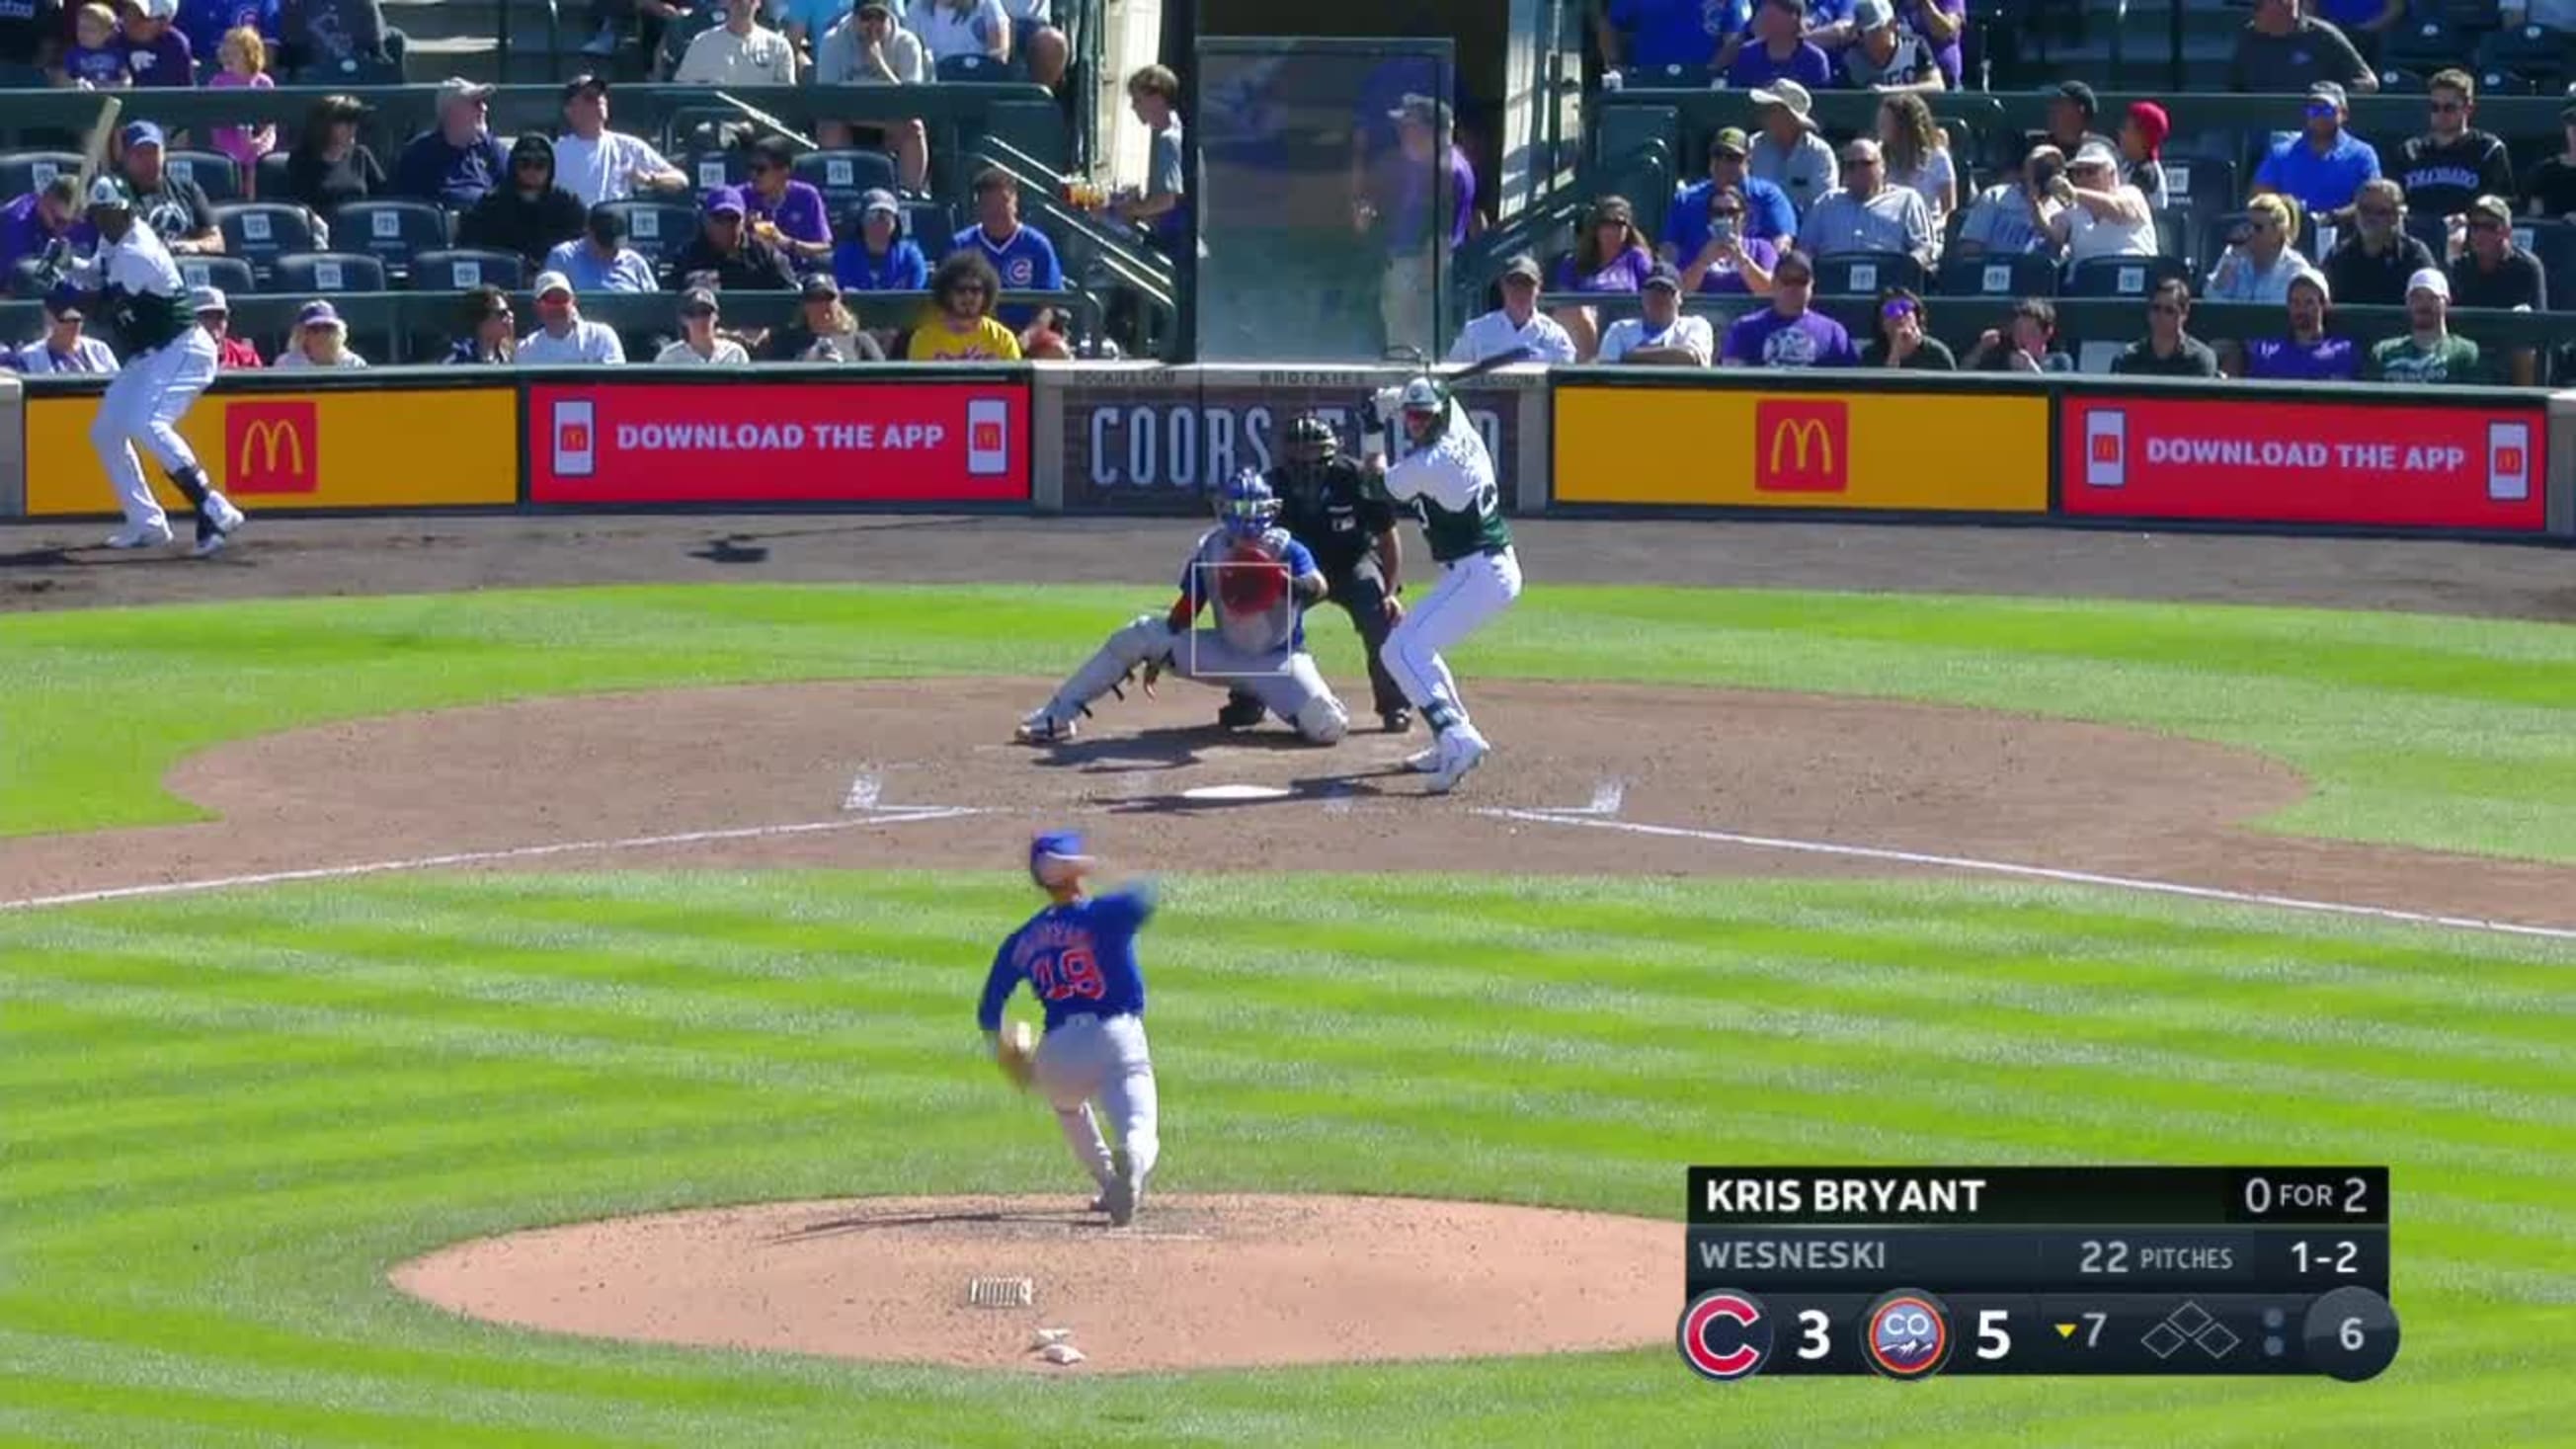 Kris Bryant's confident realization will pump Rockies fans up